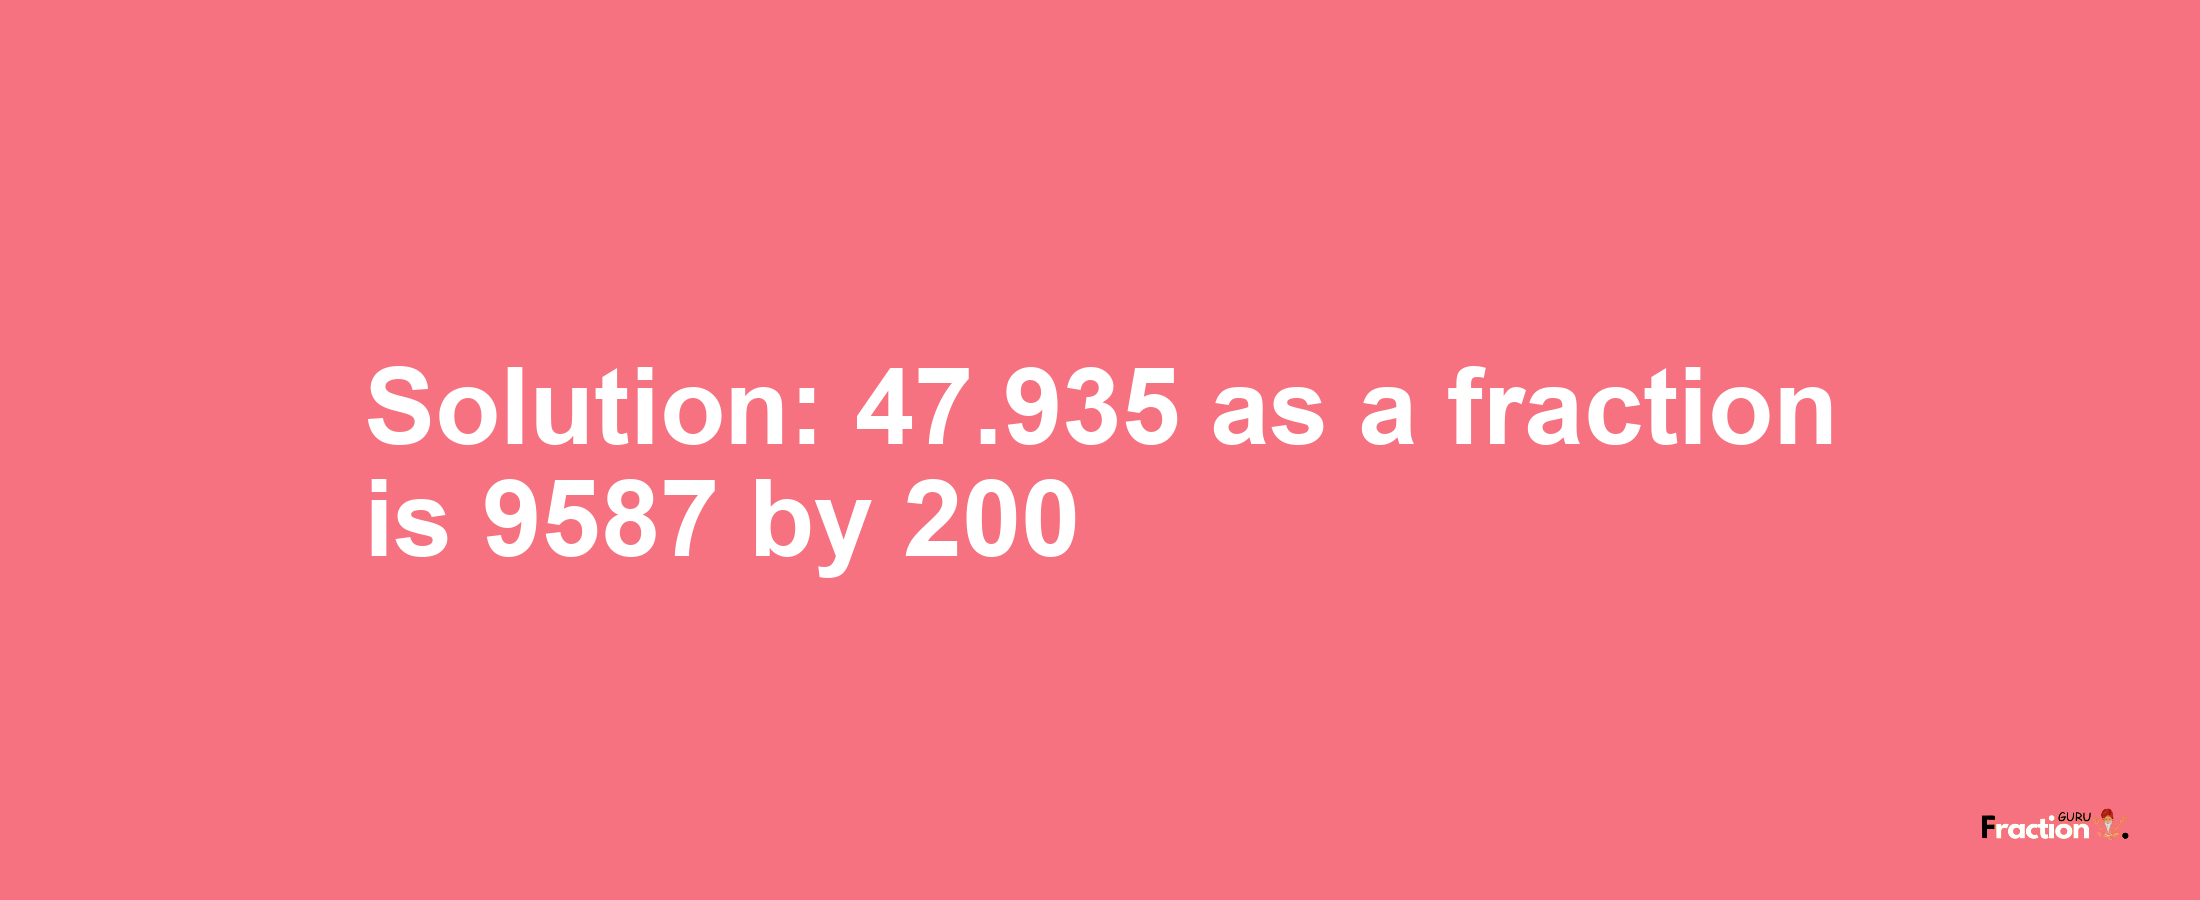 Solution:47.935 as a fraction is 9587/200